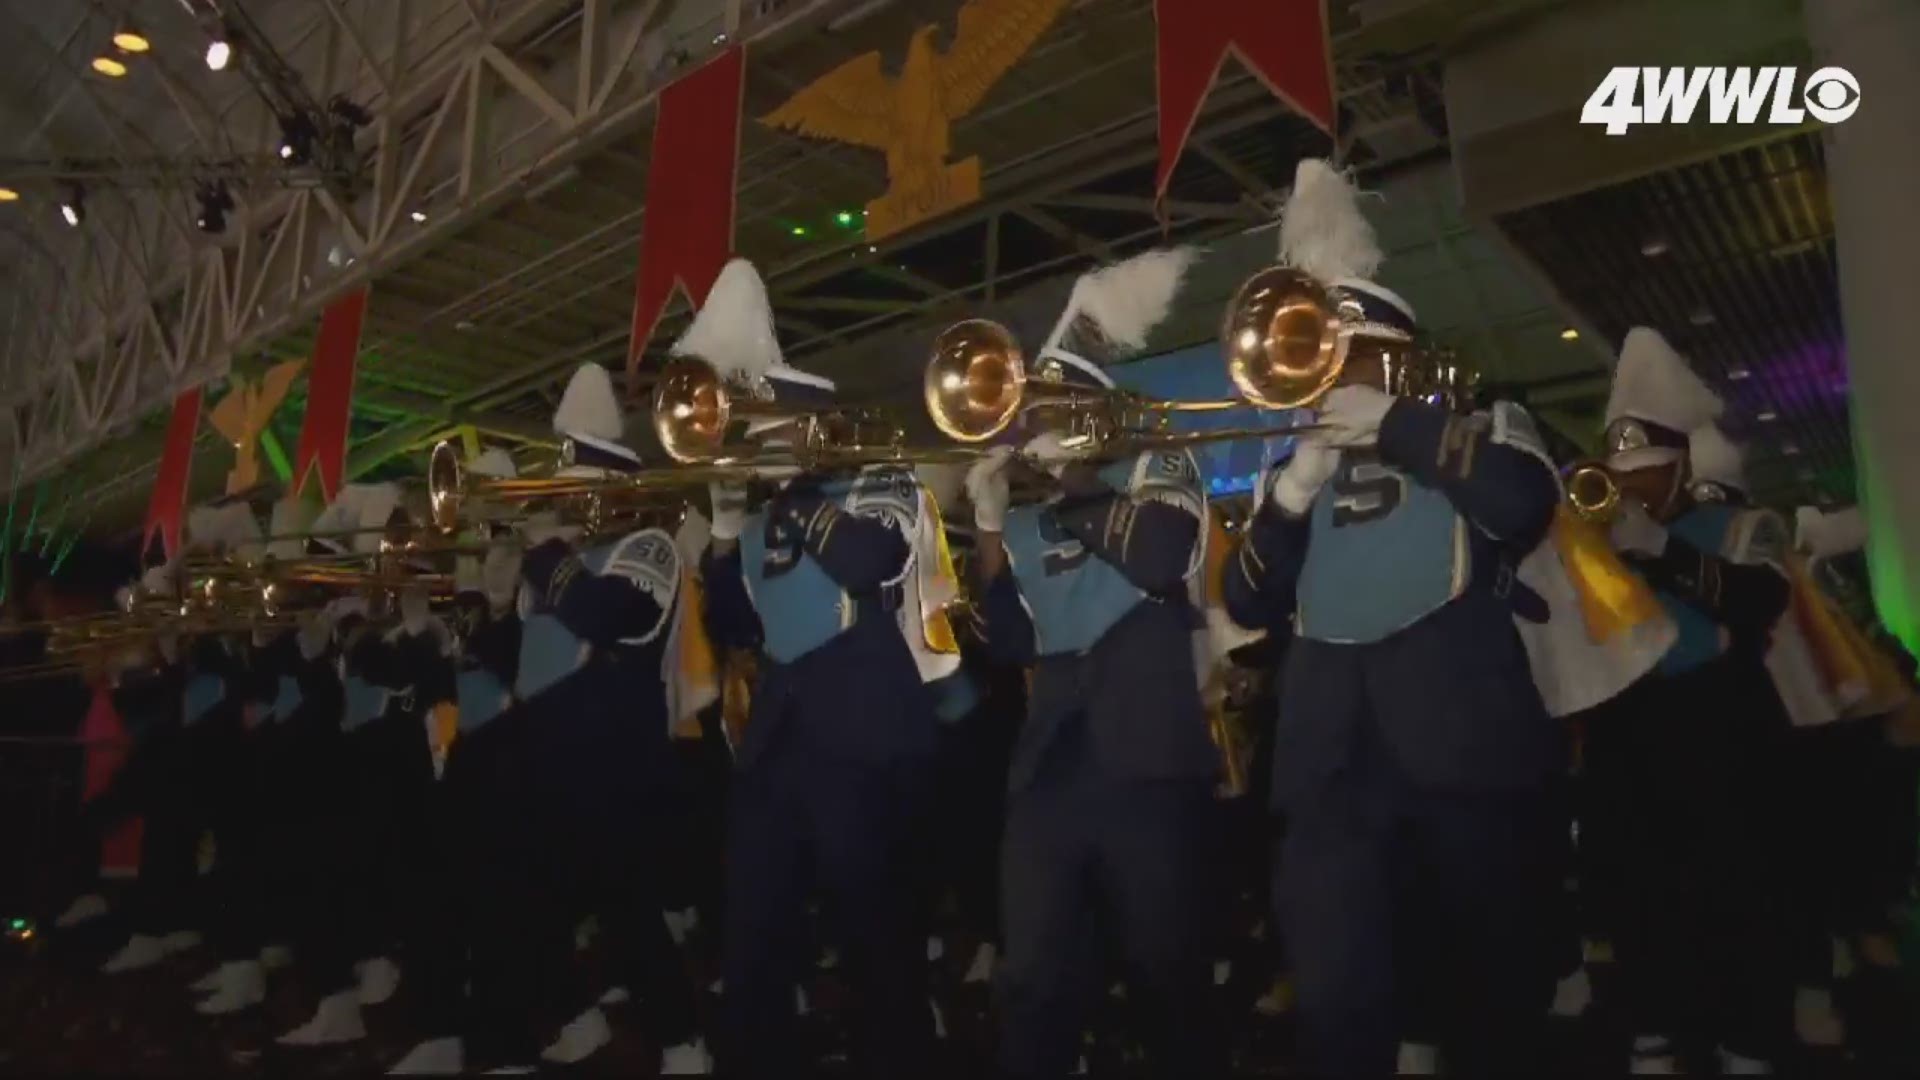 Southern University's Marching Band - The Human Jukebox - in the Krewe of Bacchus Sunday night at the Convention Center.